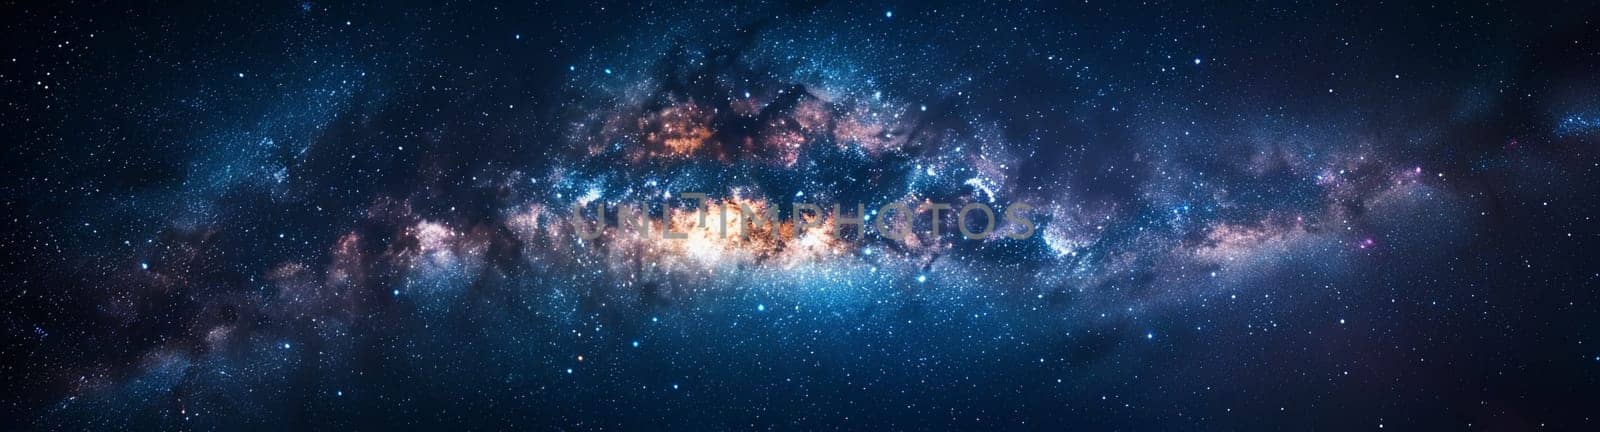 Vibrant panoramic view of a galaxy with stars, nebulae and cosmic dust, captured for graphic design use.